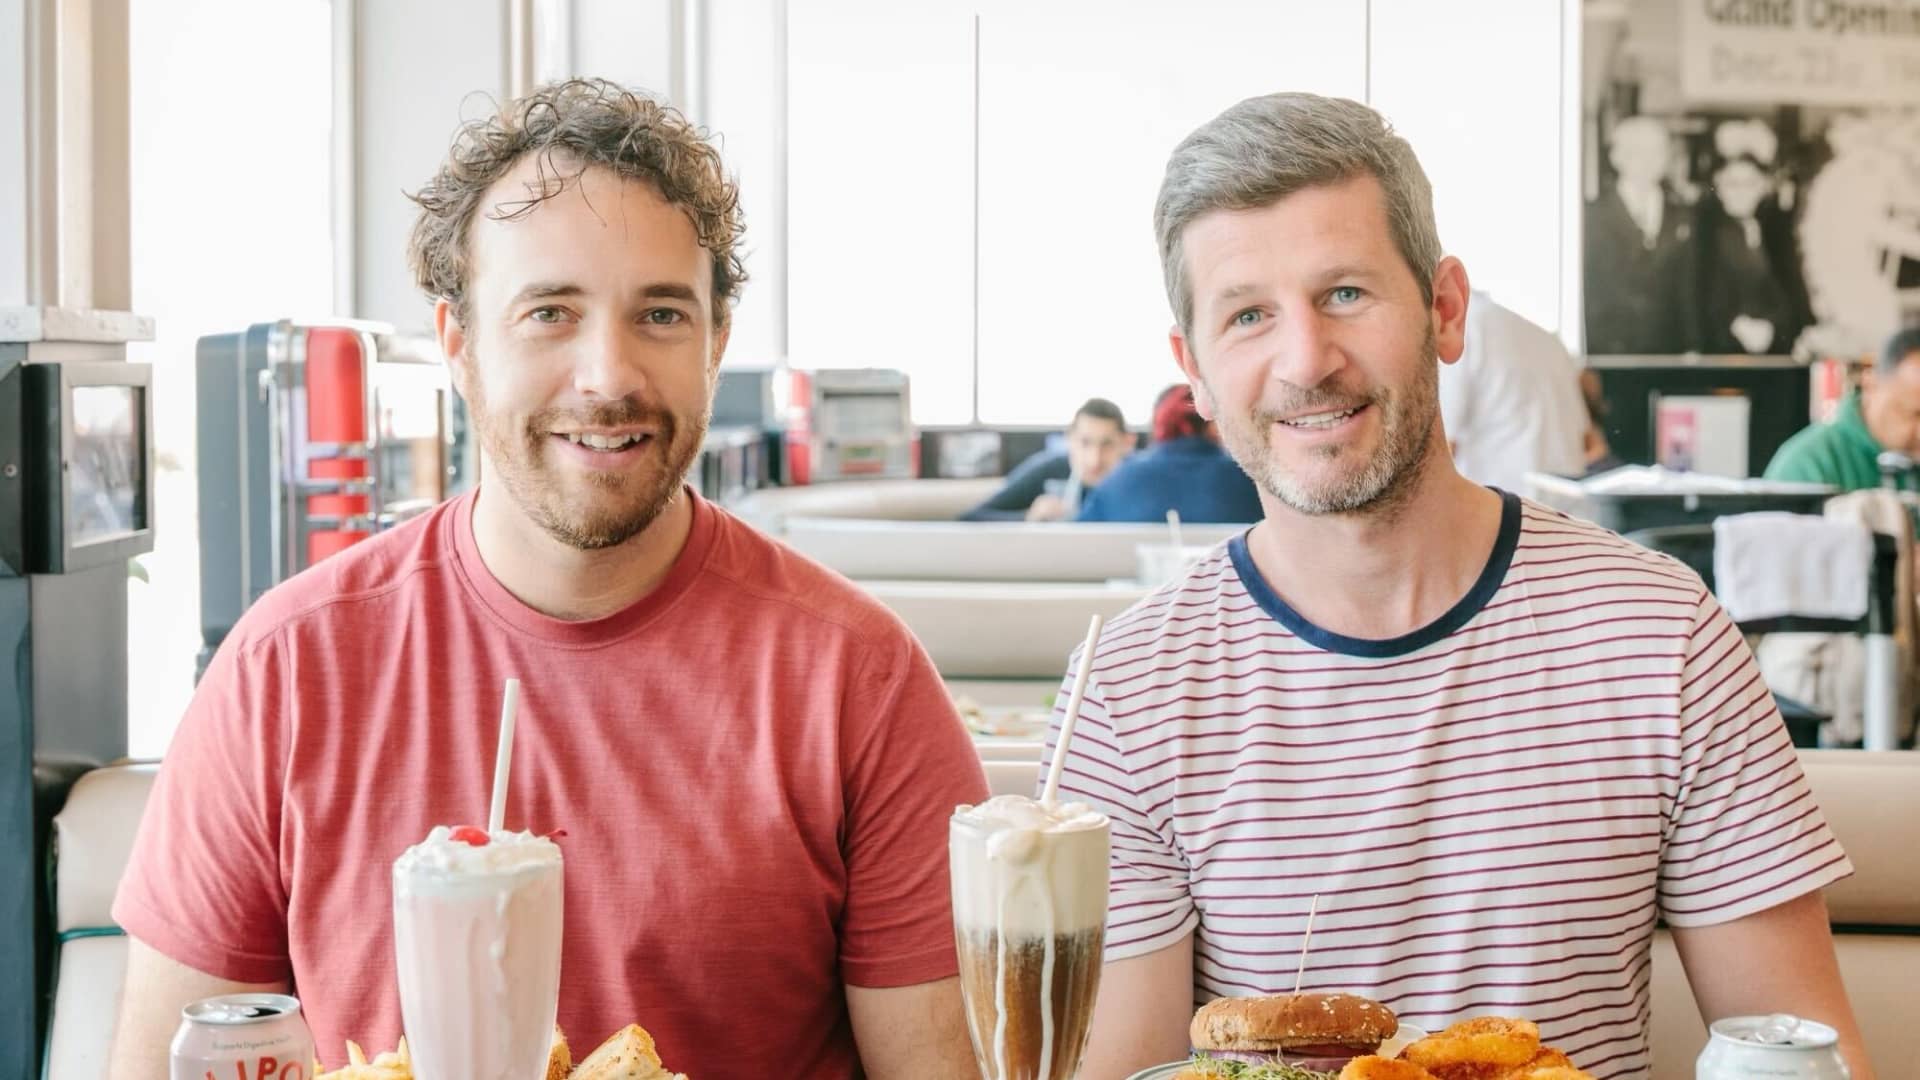 How Olipop’s founders turned a $100,000 investment into a ‘healthier’ soda brand bringing in $20 million a month